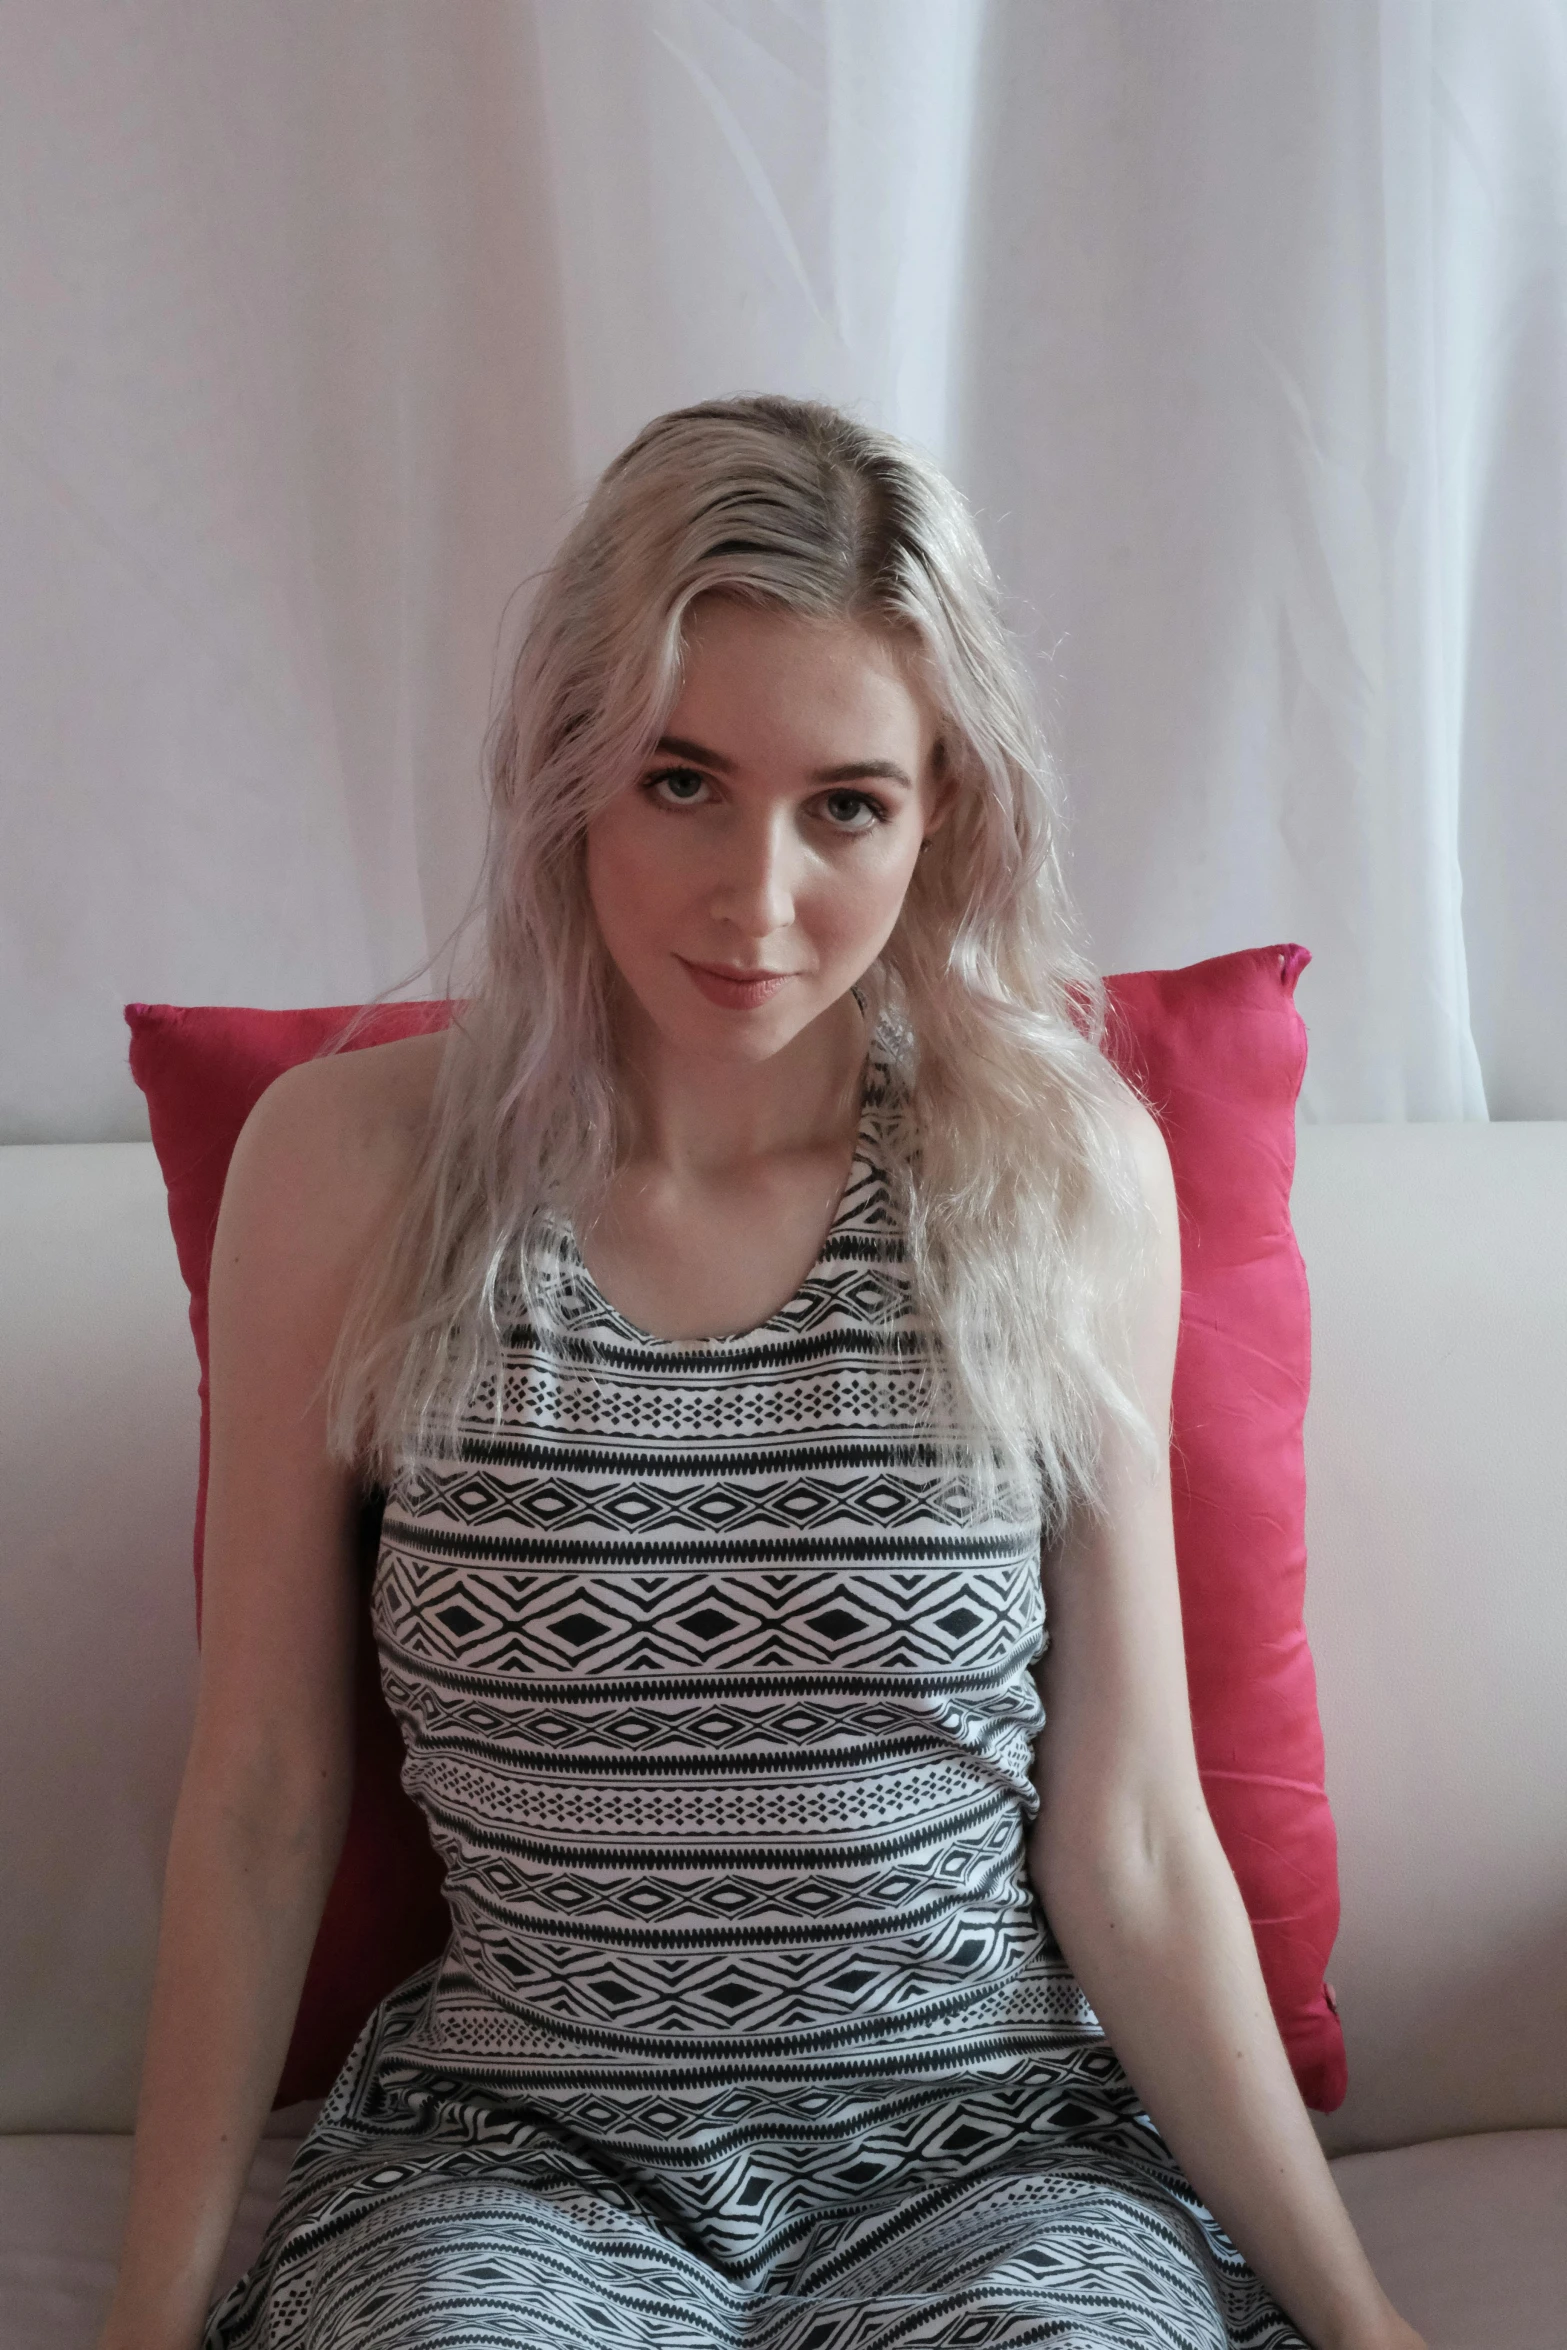 a woman with blond hair wearing pajamas and sitting on a sofa